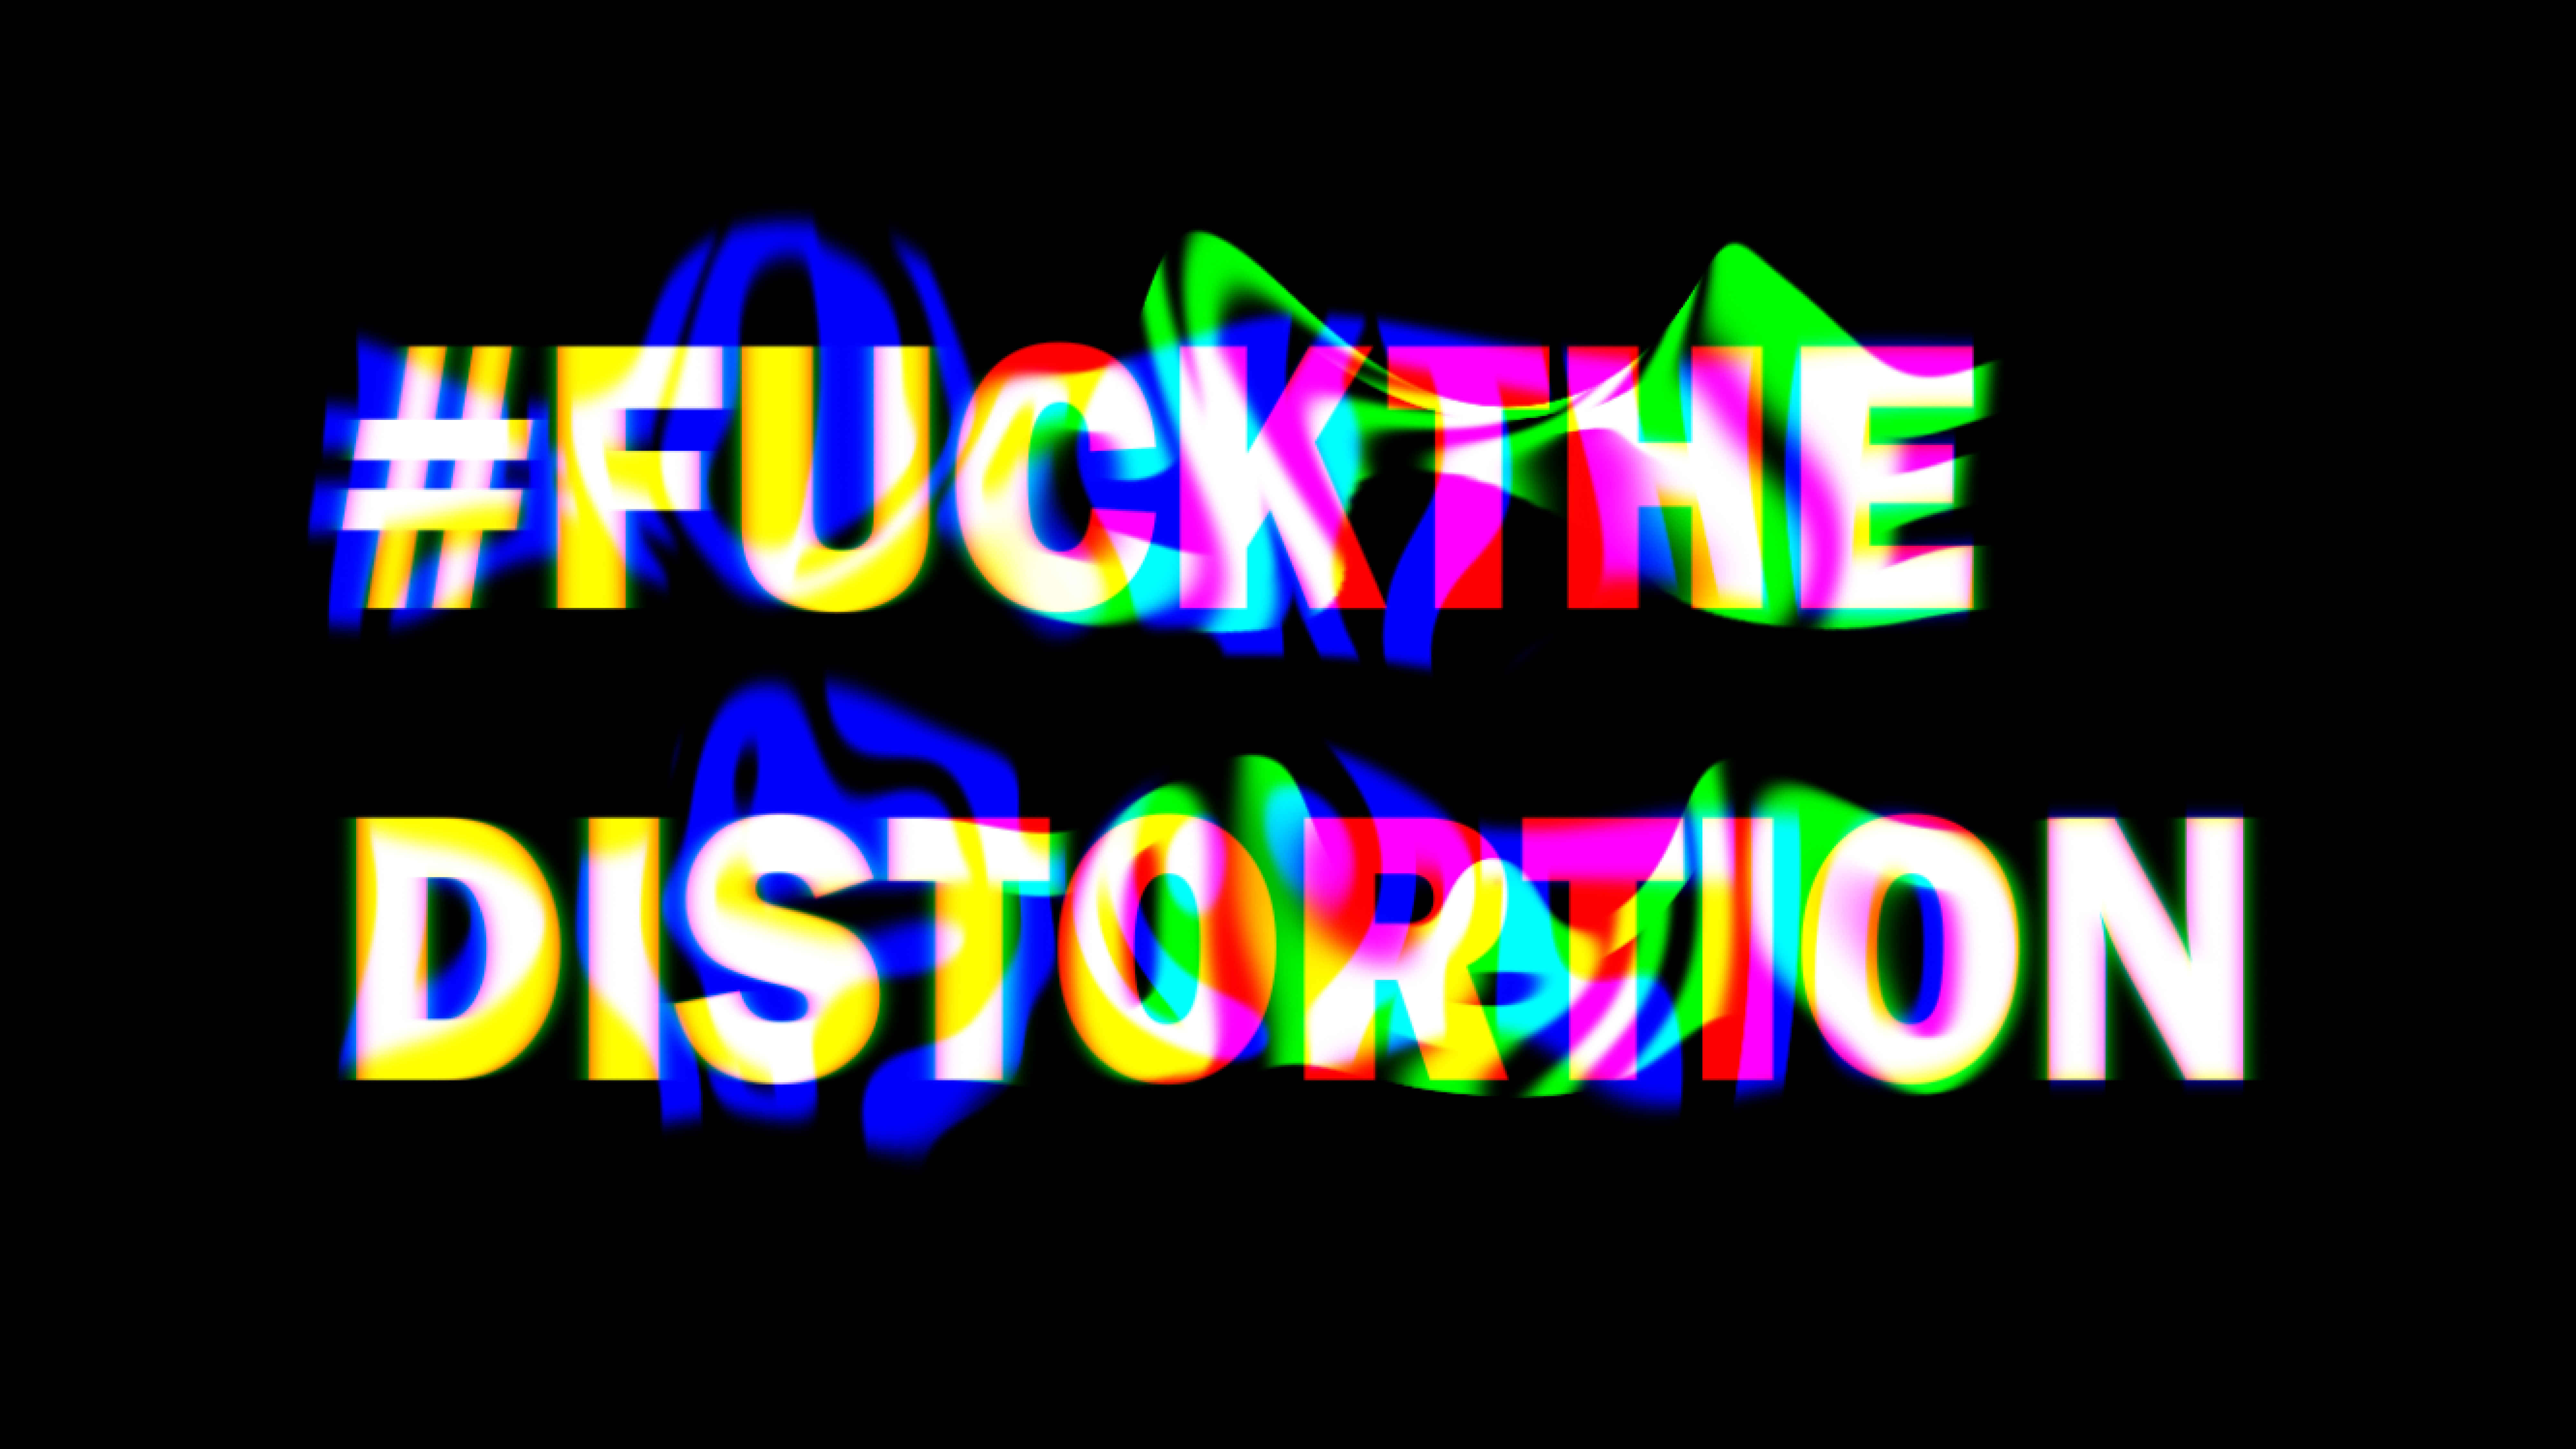 Promotional video showing the campaign of #F**kTheDistortion. Thumbnail showing distorted text saying #Fuckthedistortion on black background.